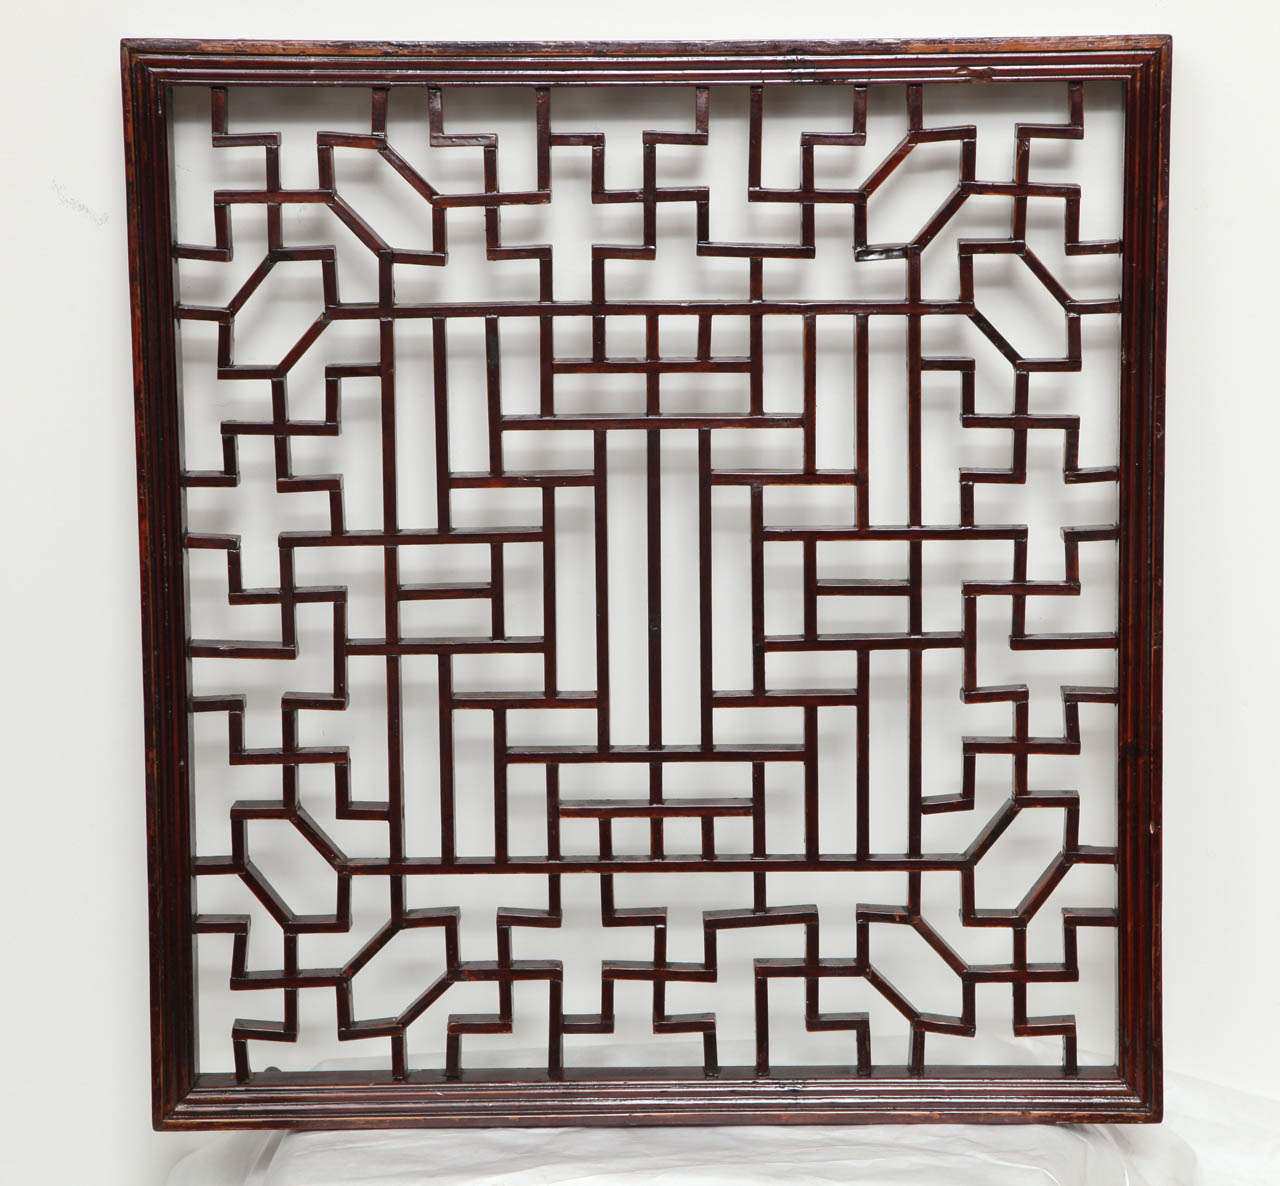 A small wood lattice screen panel in a traditional Chinese pattern.  Can be mirror backed